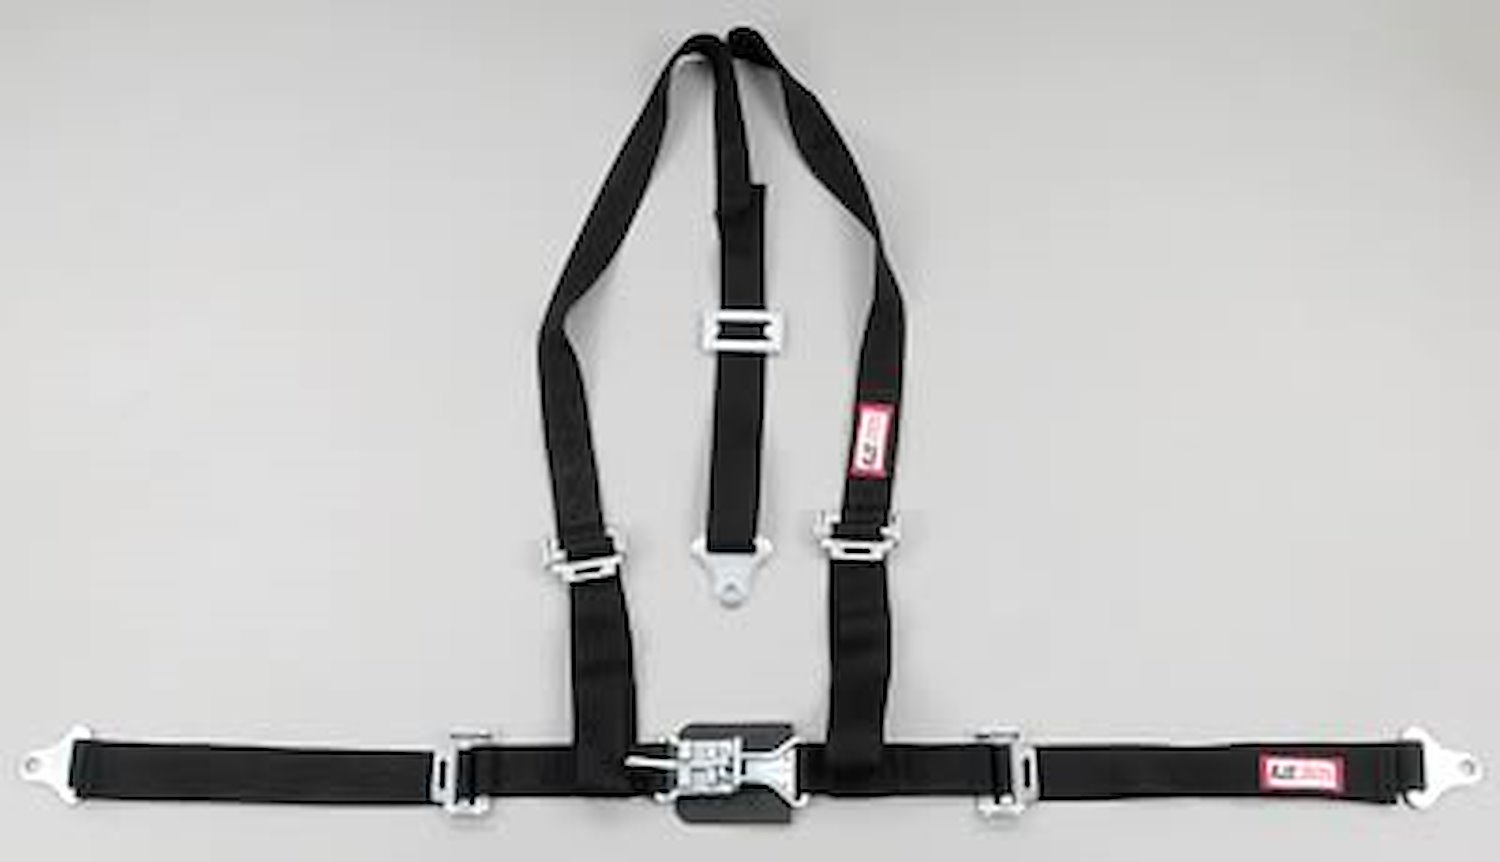 NON-SFI L&L HARNESS 3 PULL UP Lap Belt BOLT SEWN IN 2 S.H. Individual FLOOR Mount w/STERNUM STRAP WRAP/BOLT GRAY